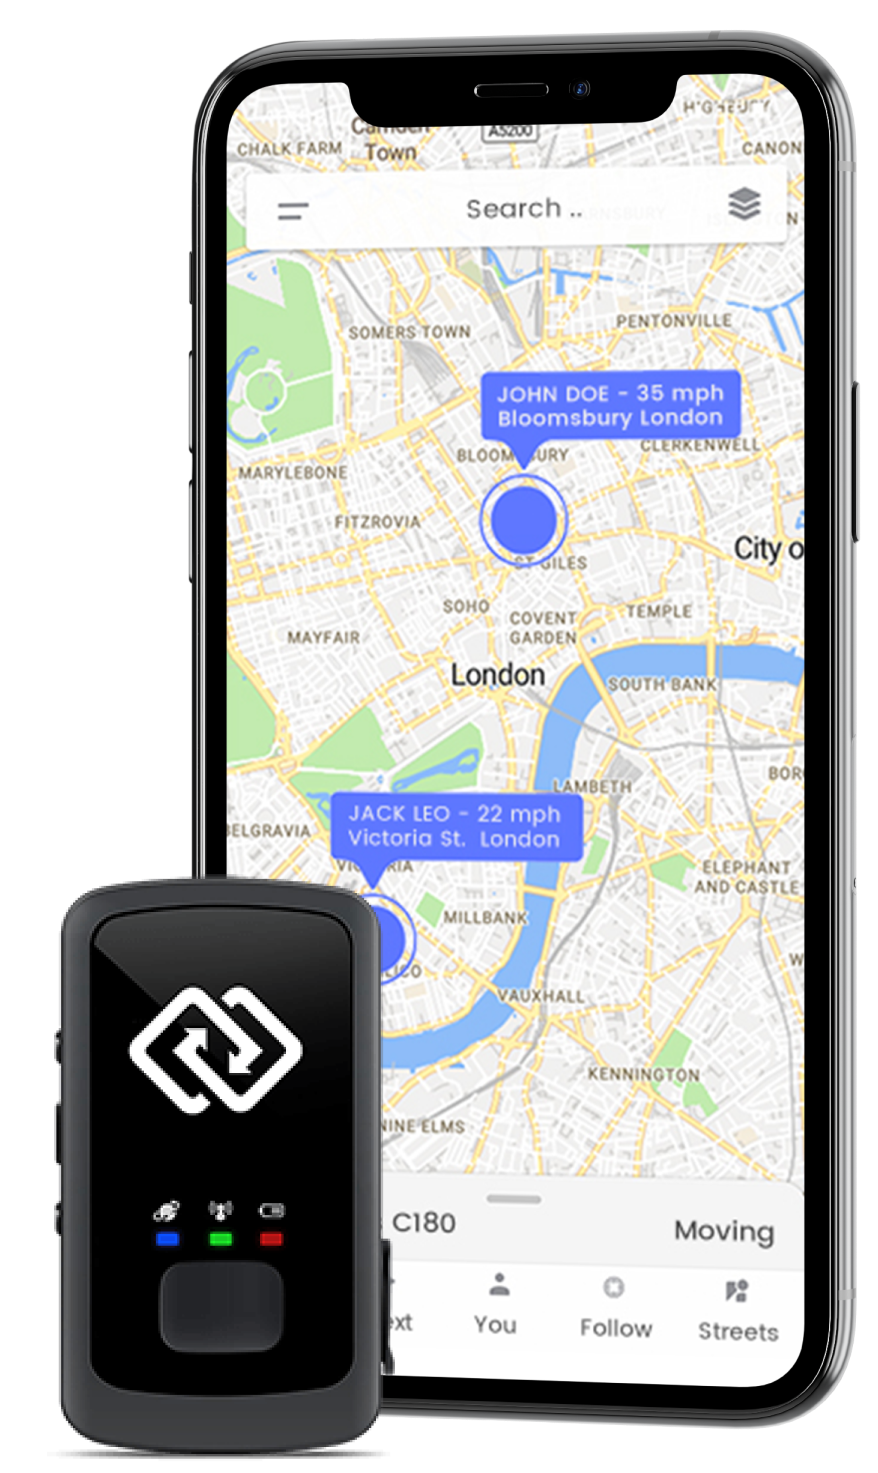 Smartphone GPS Tracking App and Spytrack GPS Tracking Device